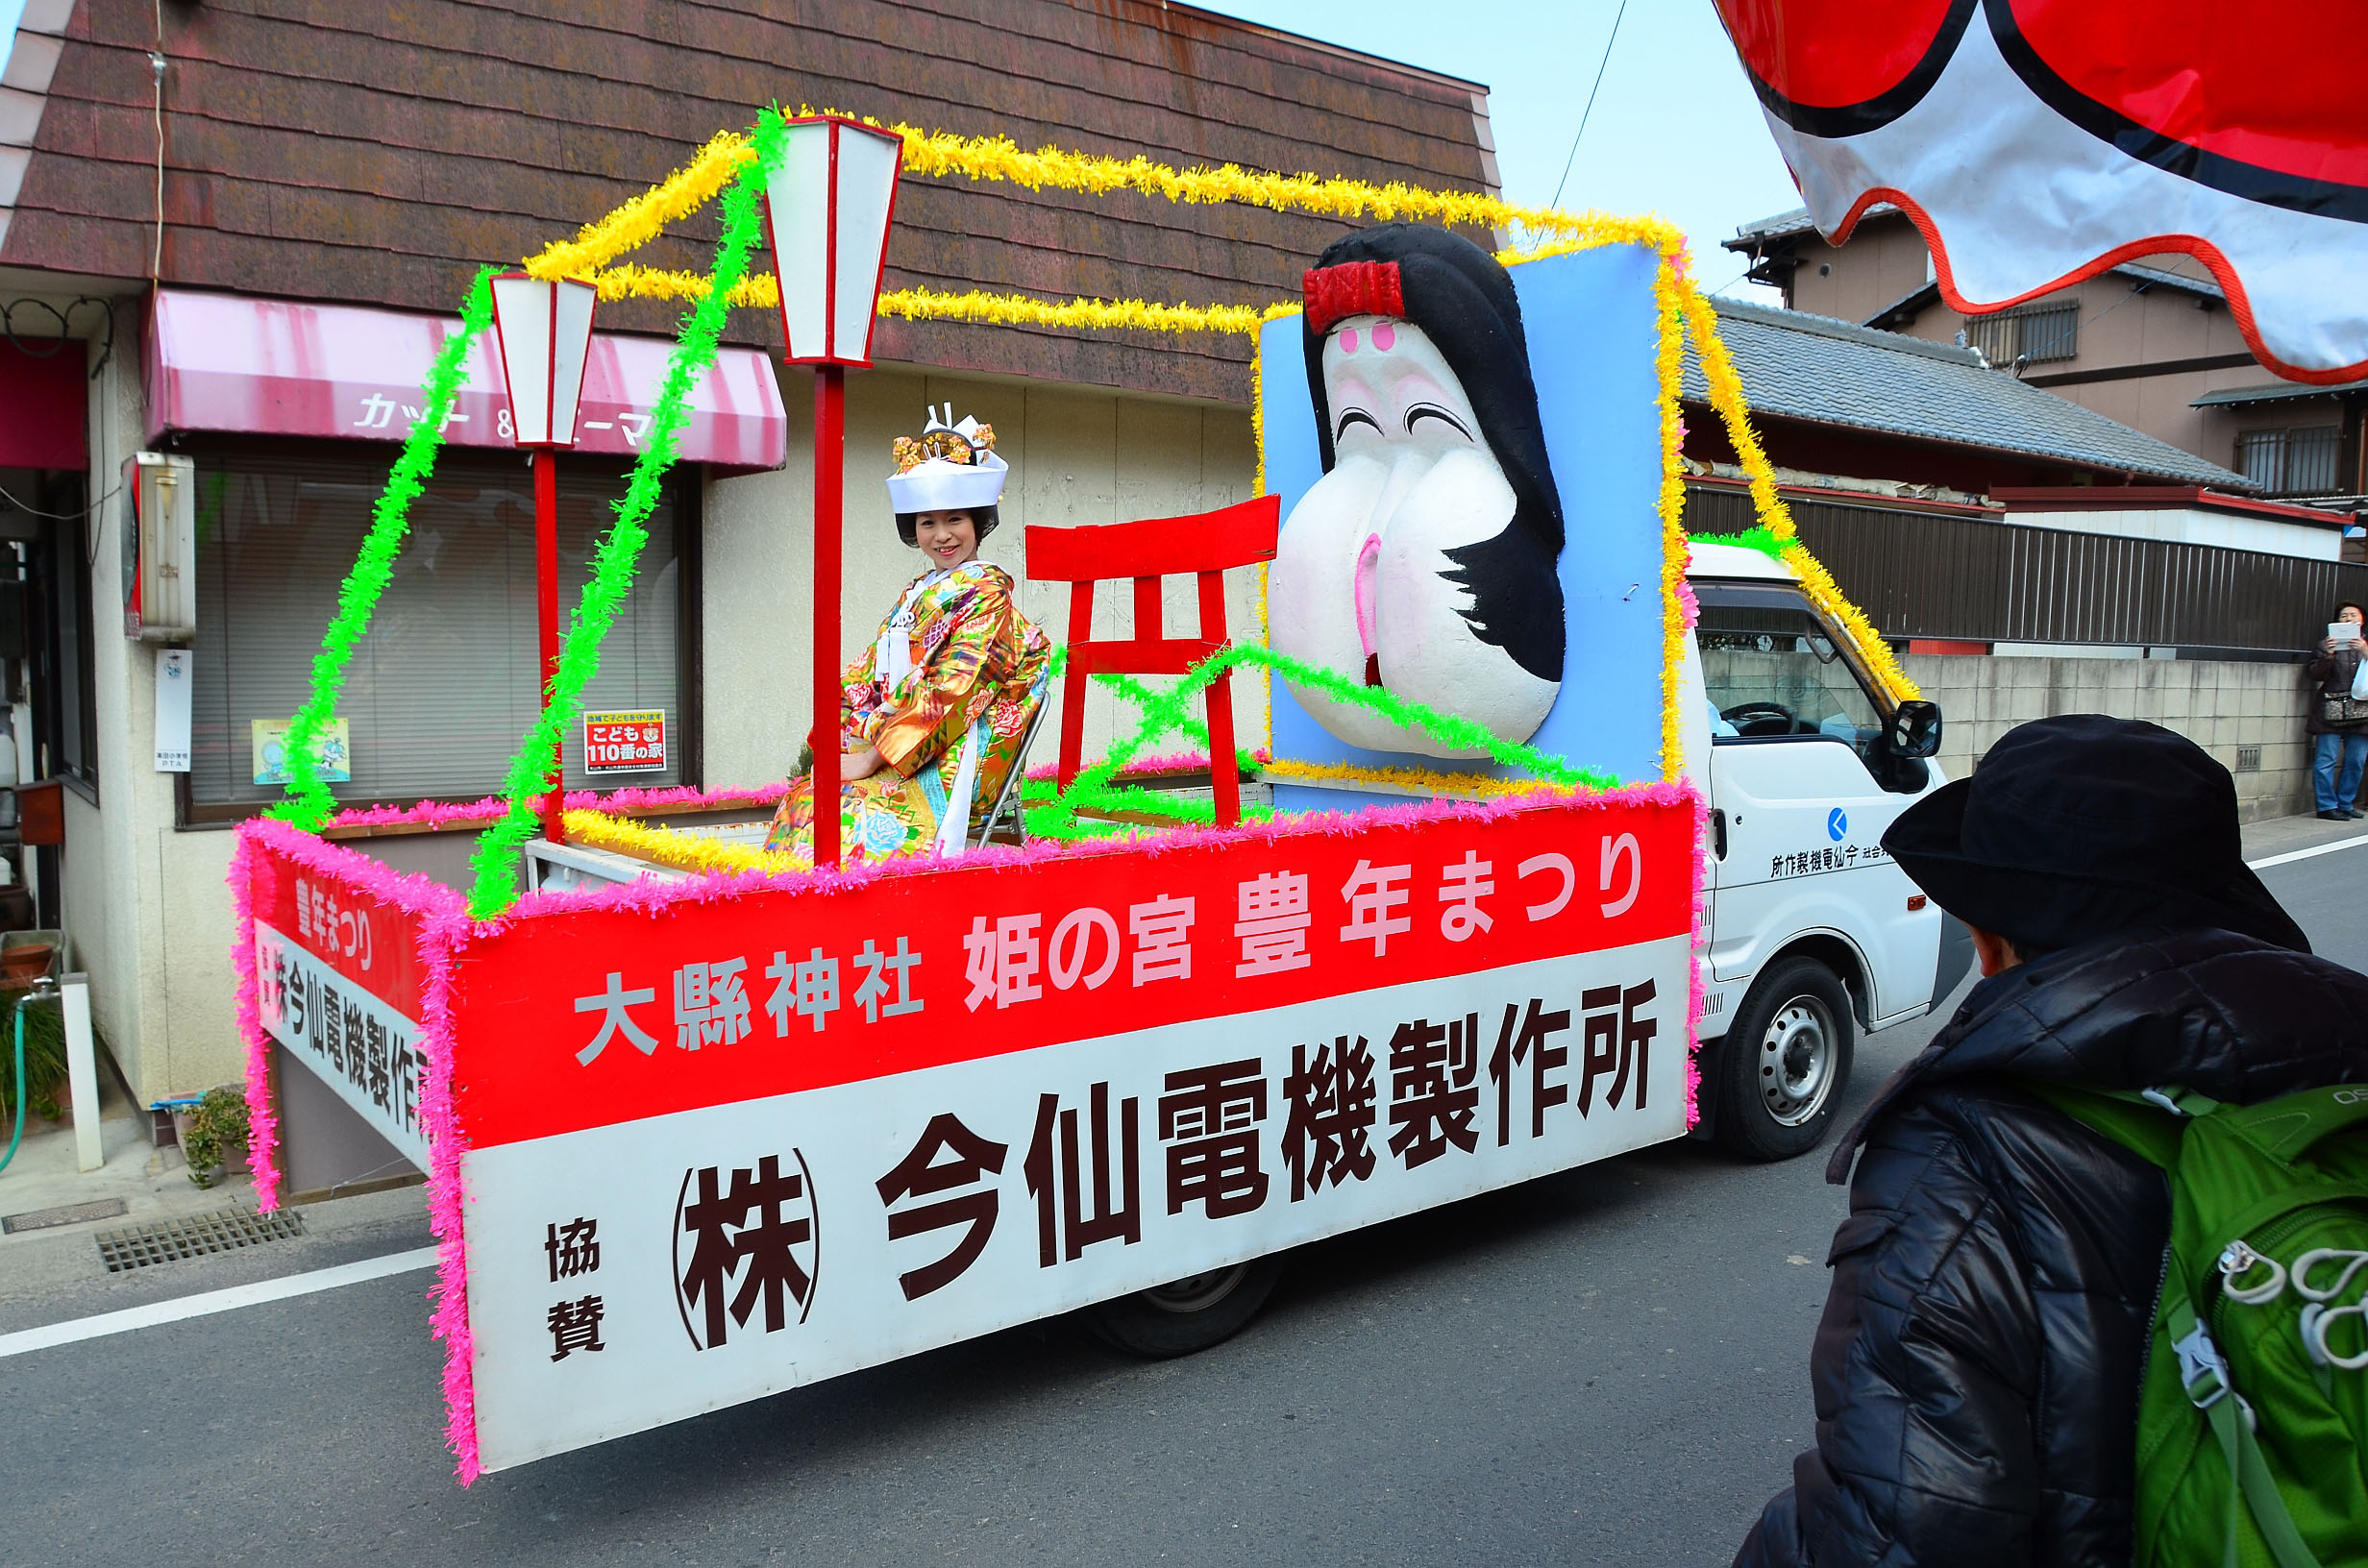 Privates on parade: A float decorated with a vagina-faced creation passes by at the Himenomiya Honen Matsuri in Inuyama, Aichi Prefecture. | FLORIAN SEIDEL / ABANDONED KANSAI